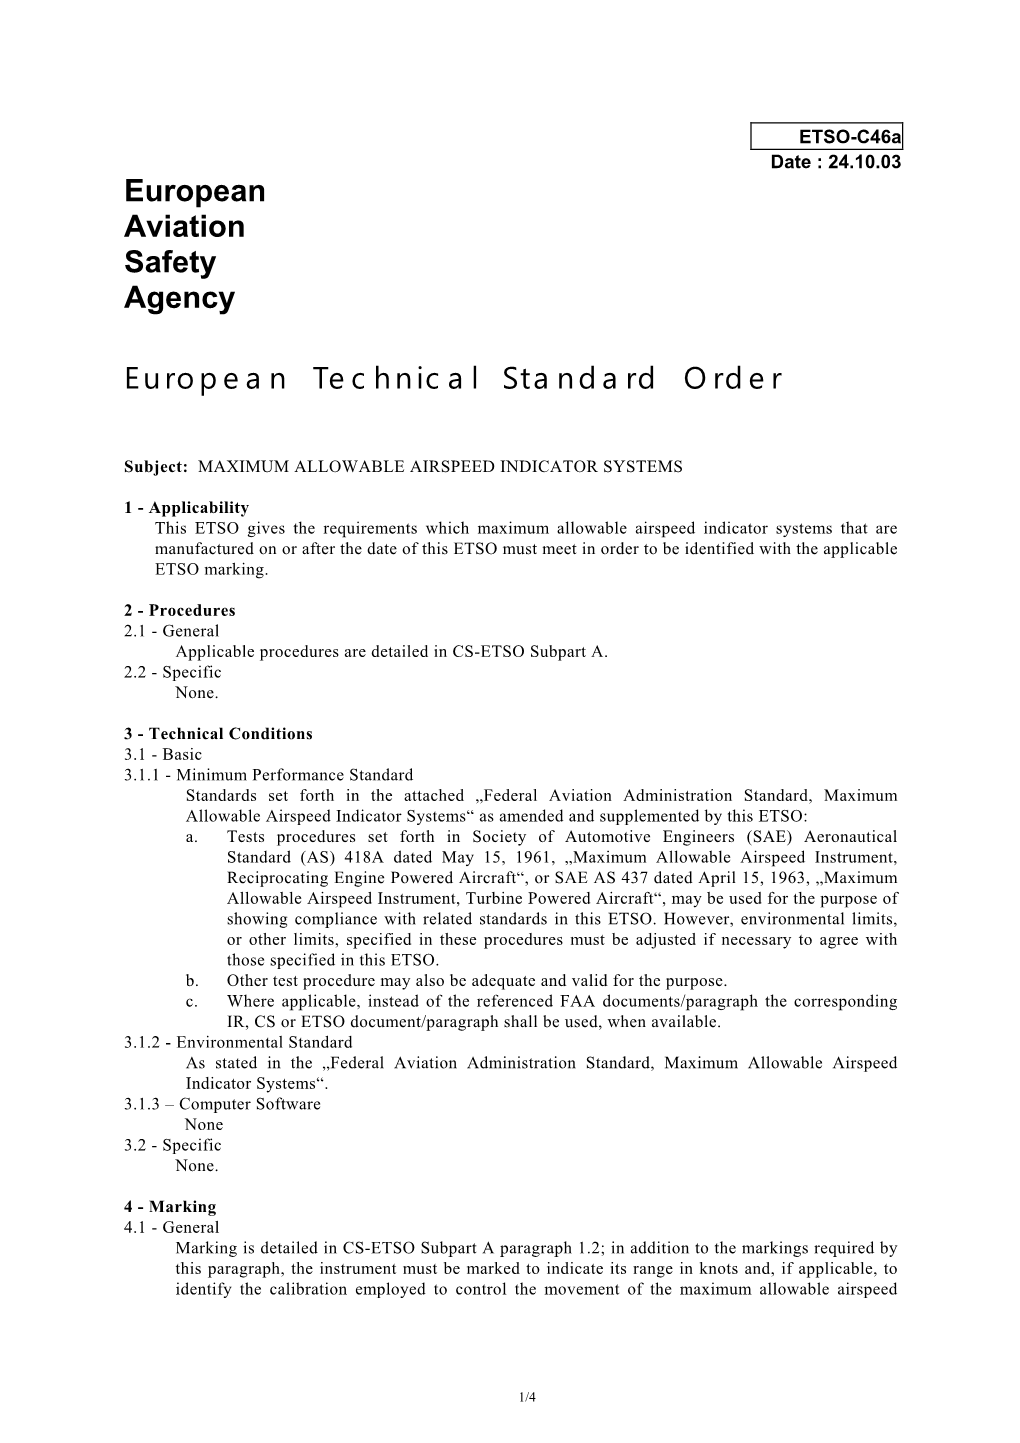 ETSO-C46a Date : 24.10.03 European Aviation Safety Agency